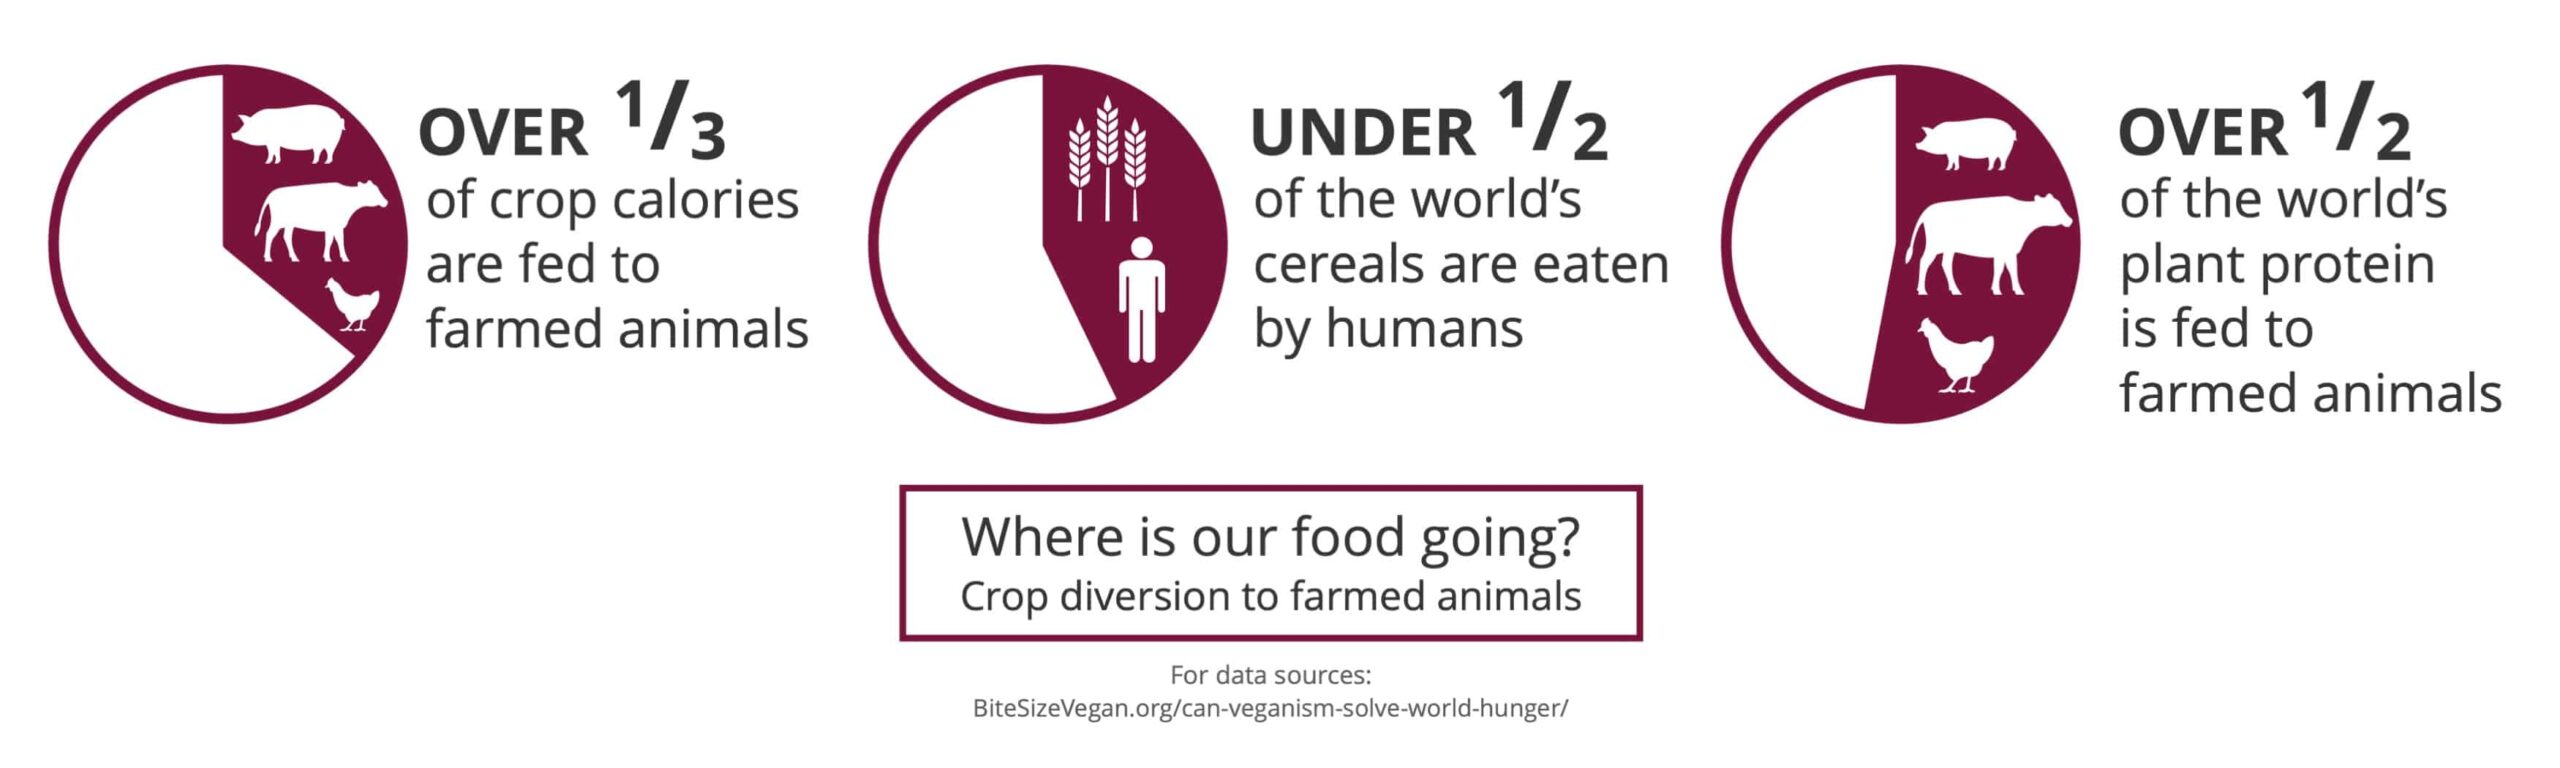 A graphic asking "Where is our good going?" and showing crop diversion to farmed animals.